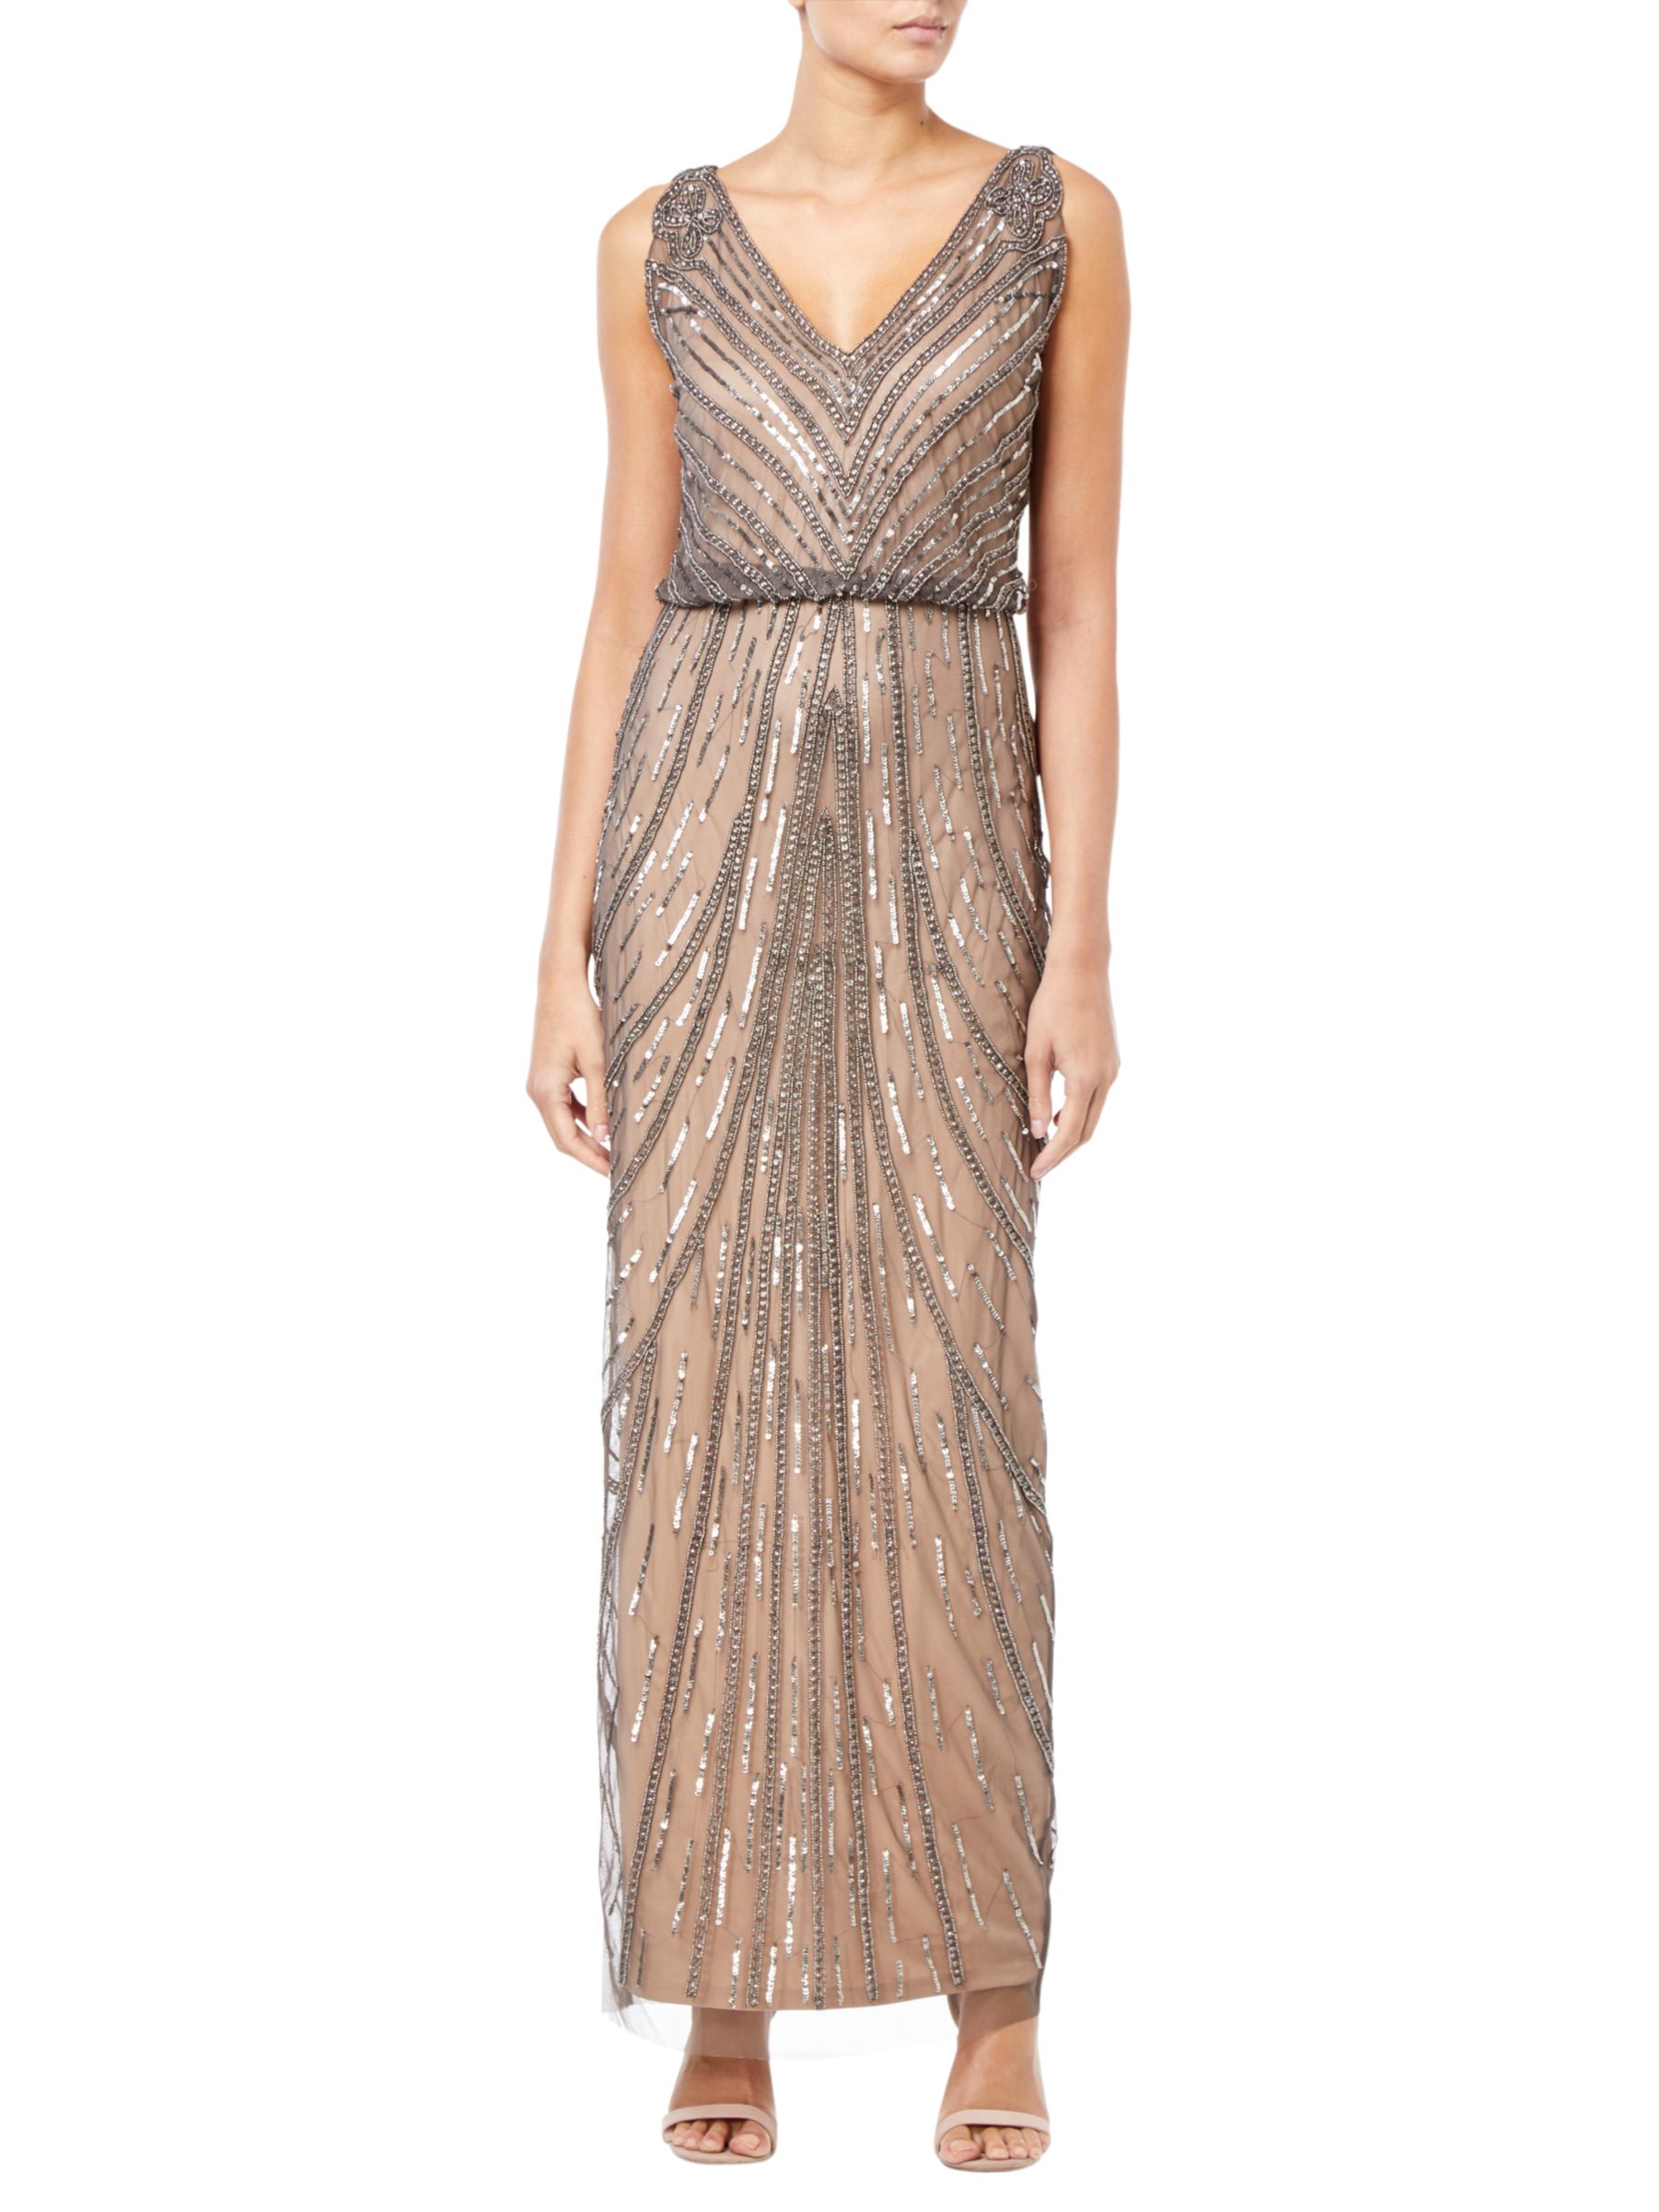 Adrianna Papell Beaded Long Dress, Natural